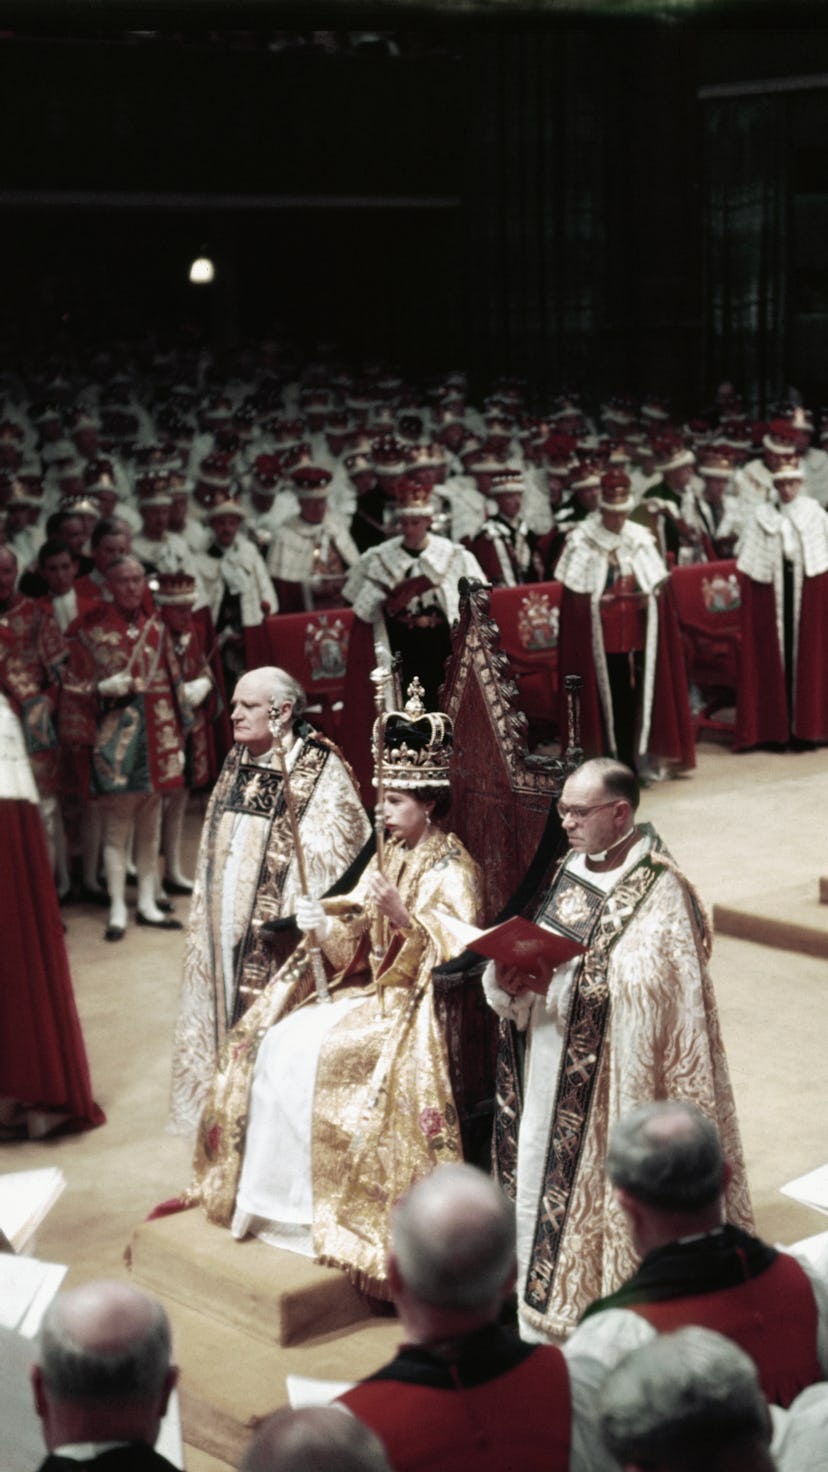 (Original Caption) Coronation. London, England: Queen Elizabeth, just after the crowning.